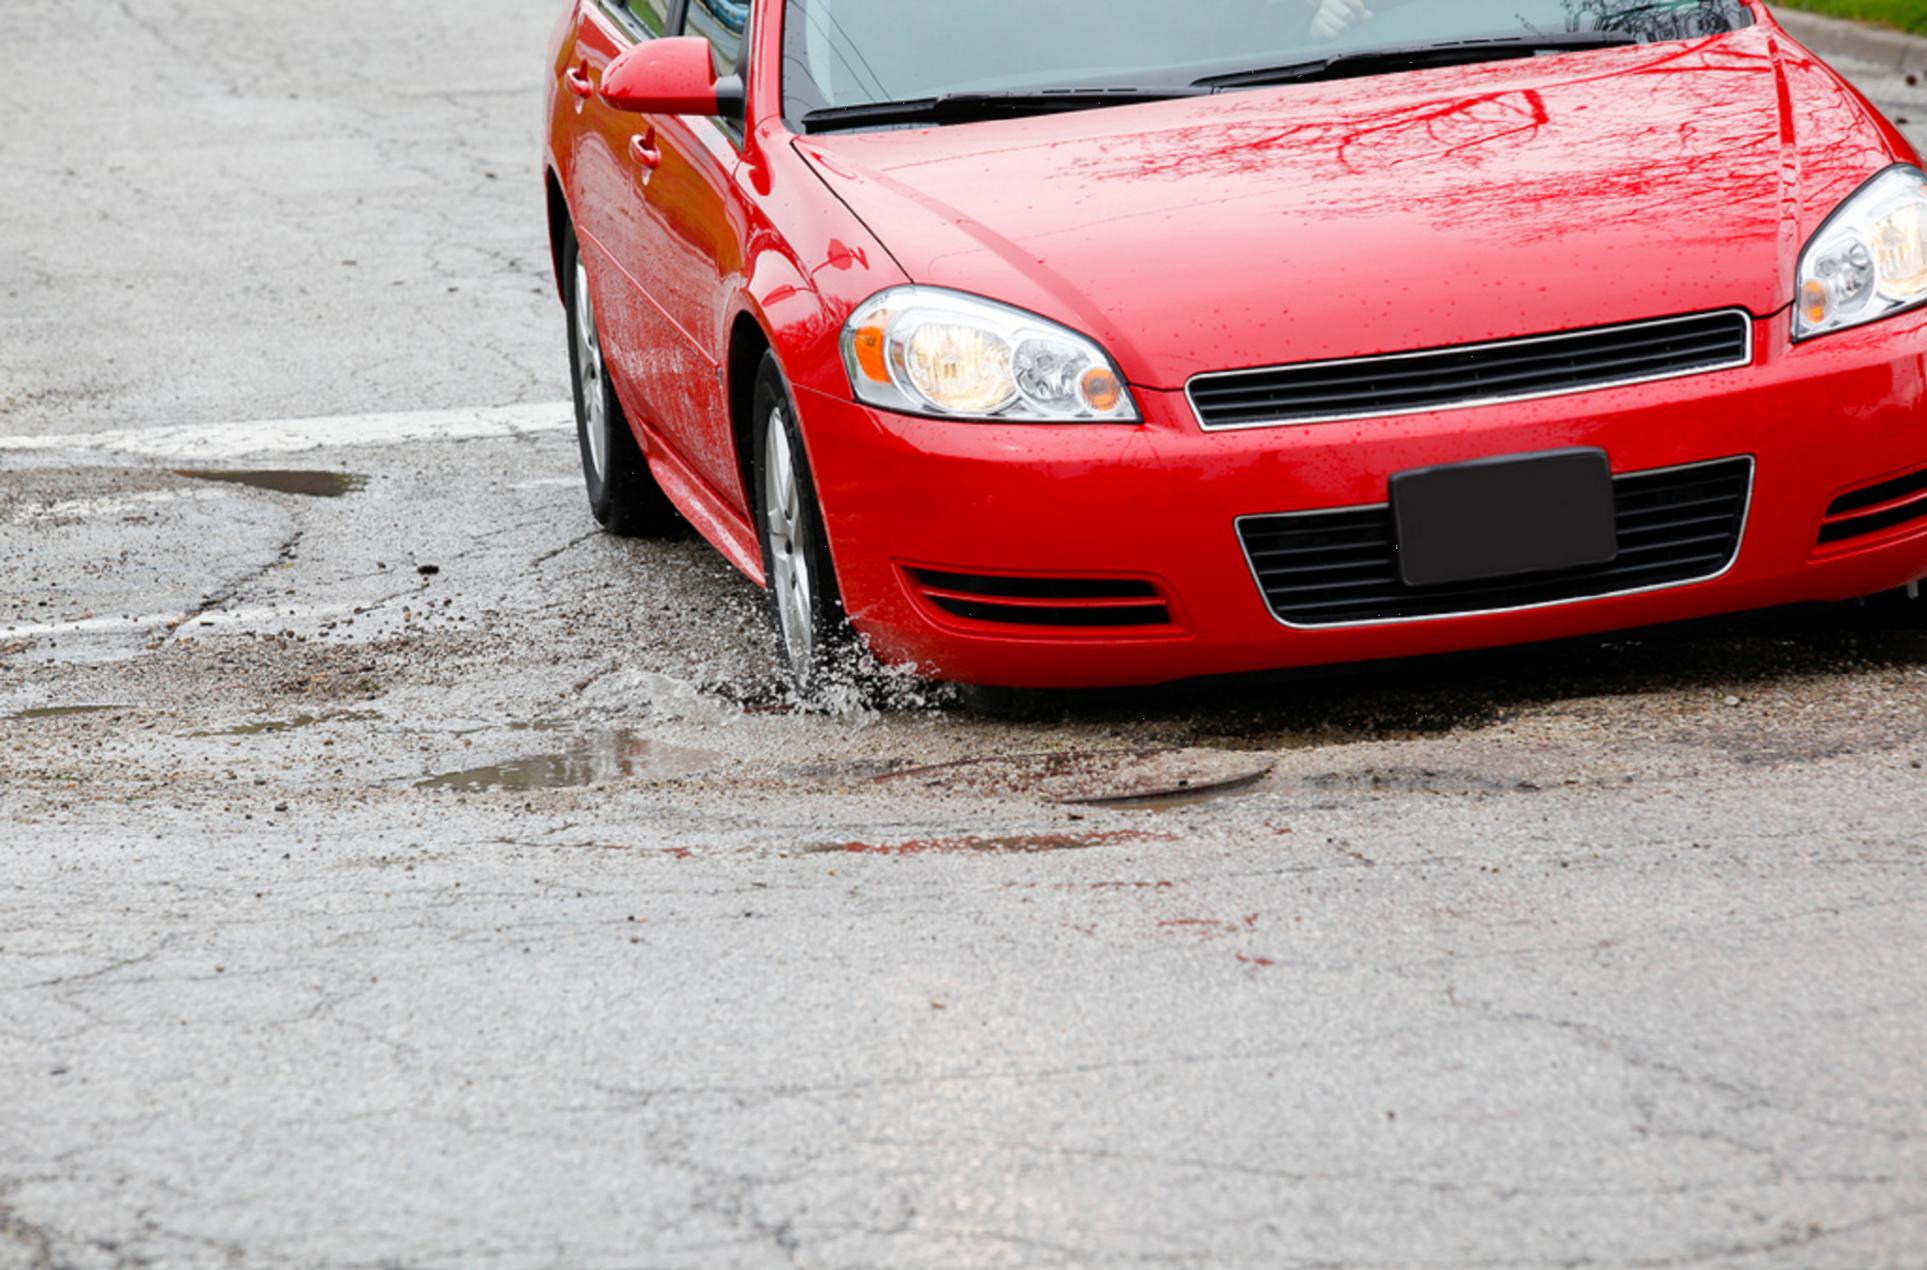 Red sedan passenger car driving over a pothole in the city